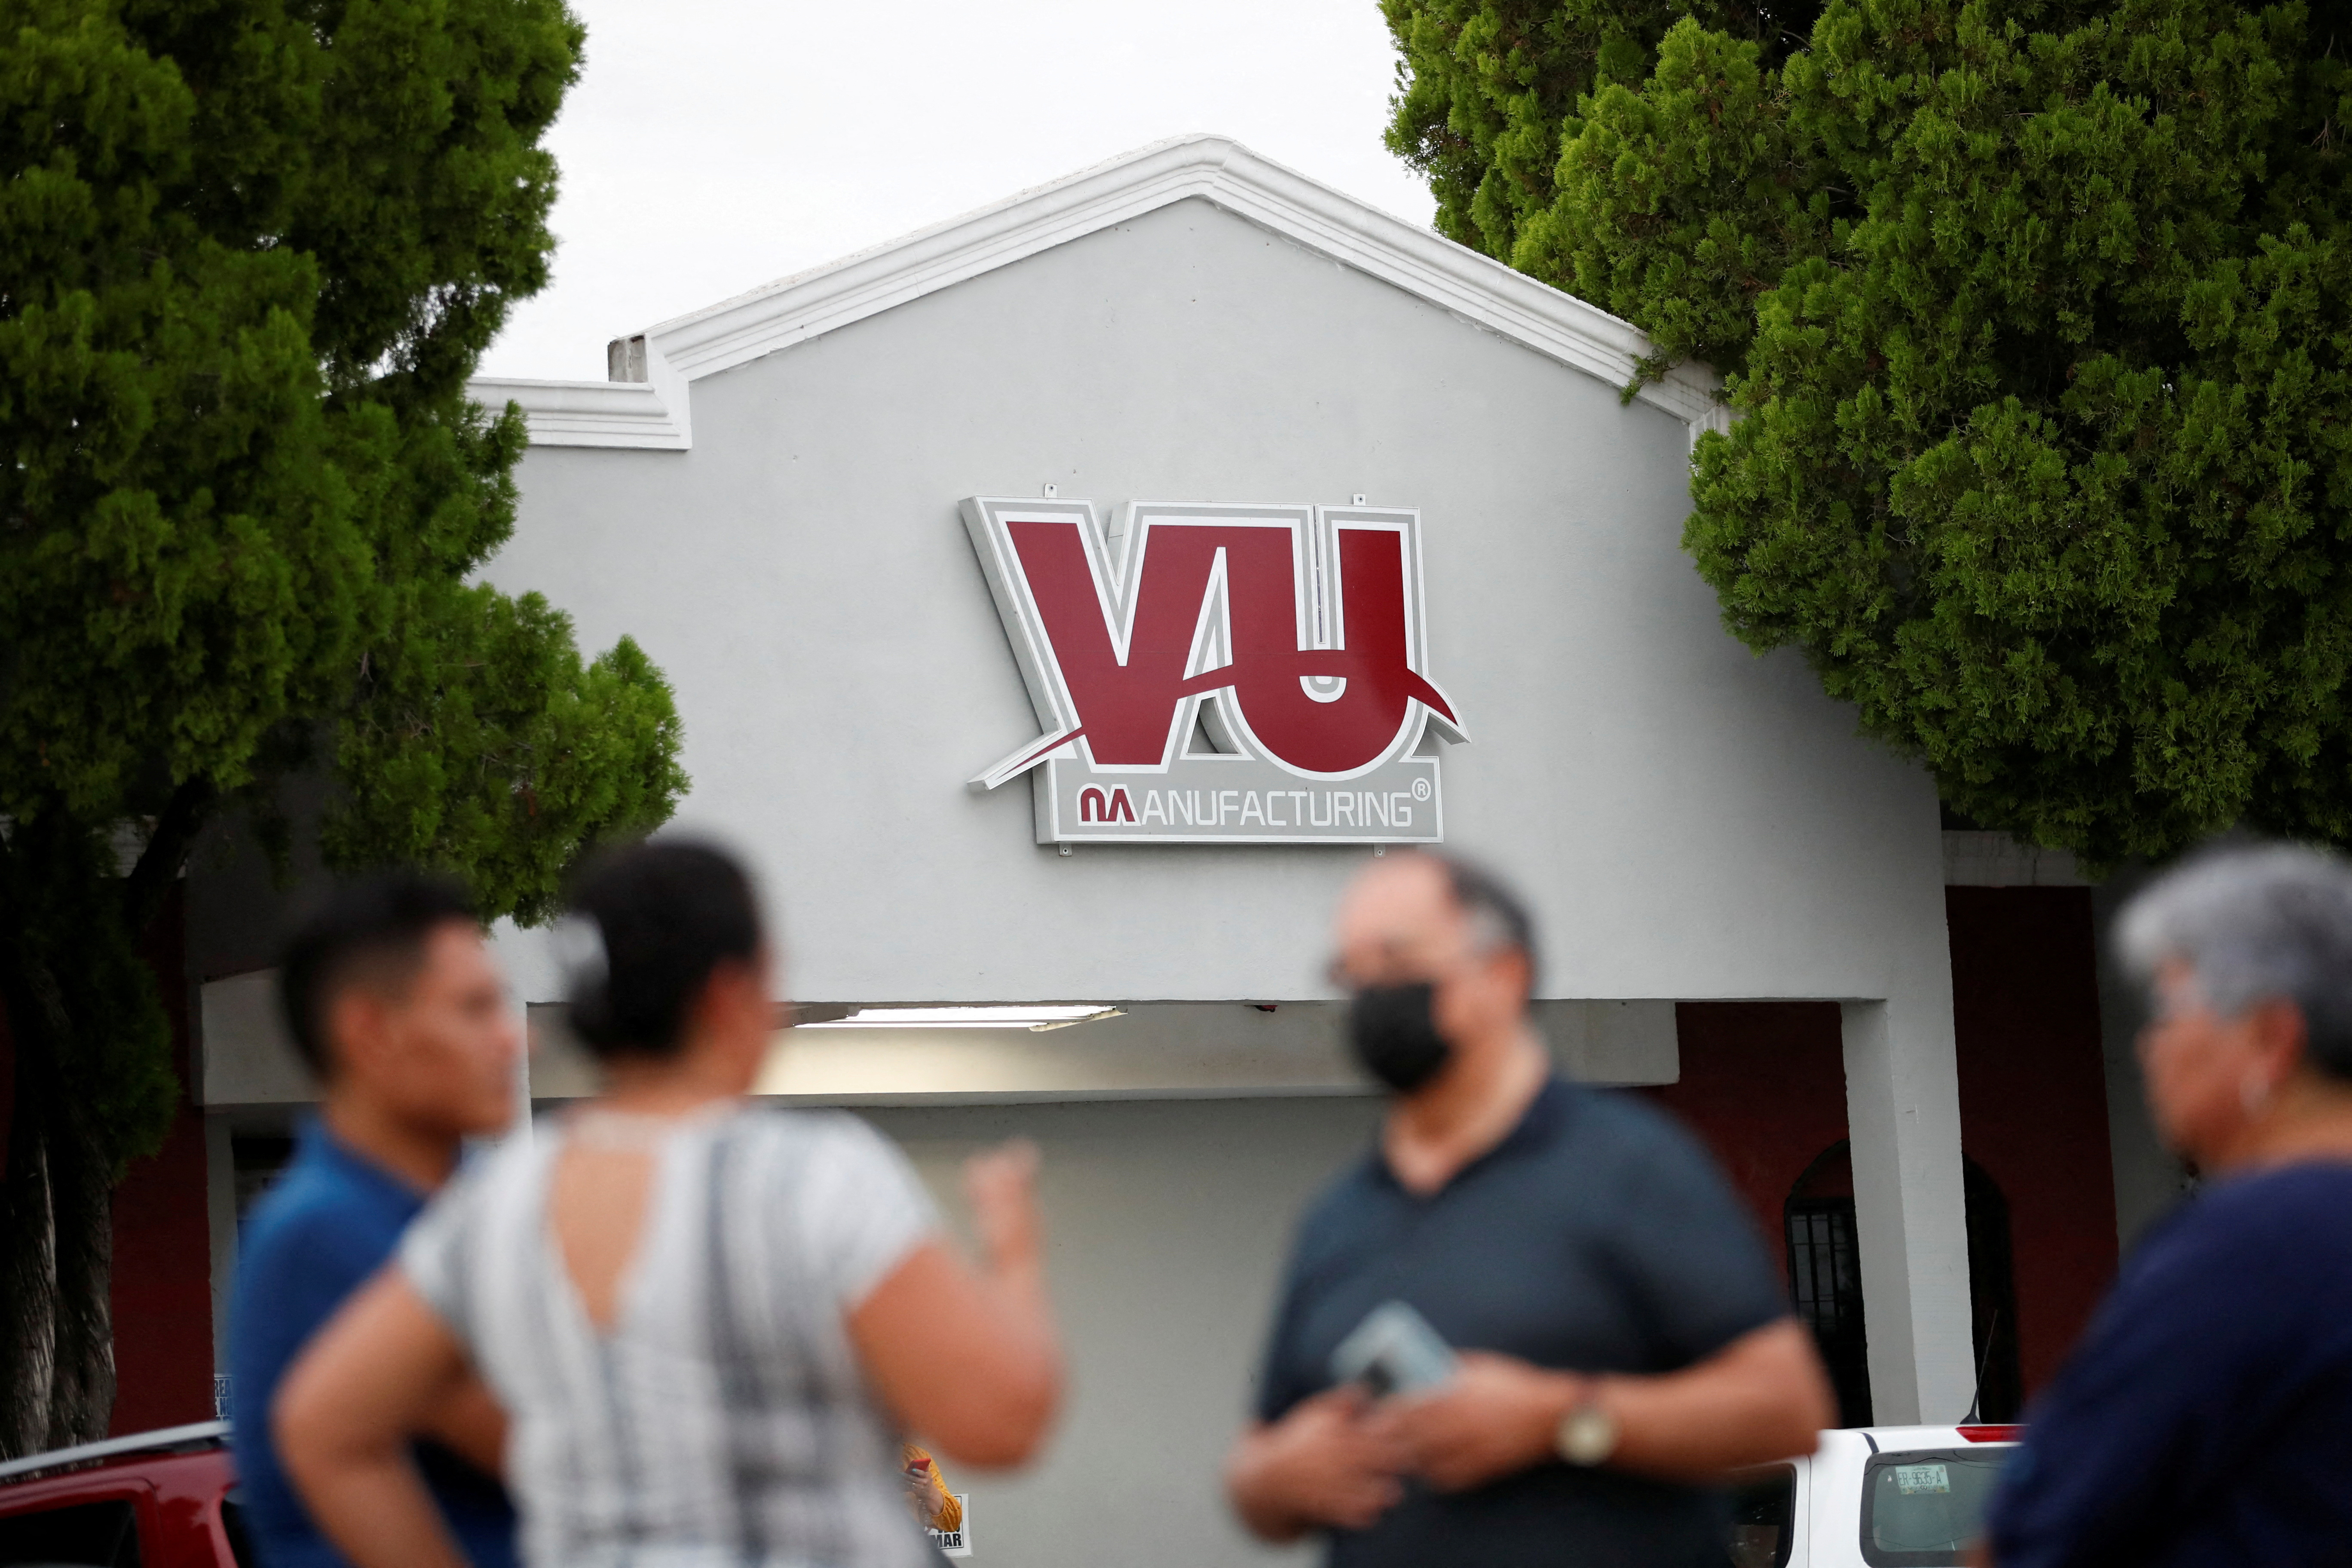 US Labor Dept 'disappointed' by VU Manufacturing plant closure in Mexico |  Reuters